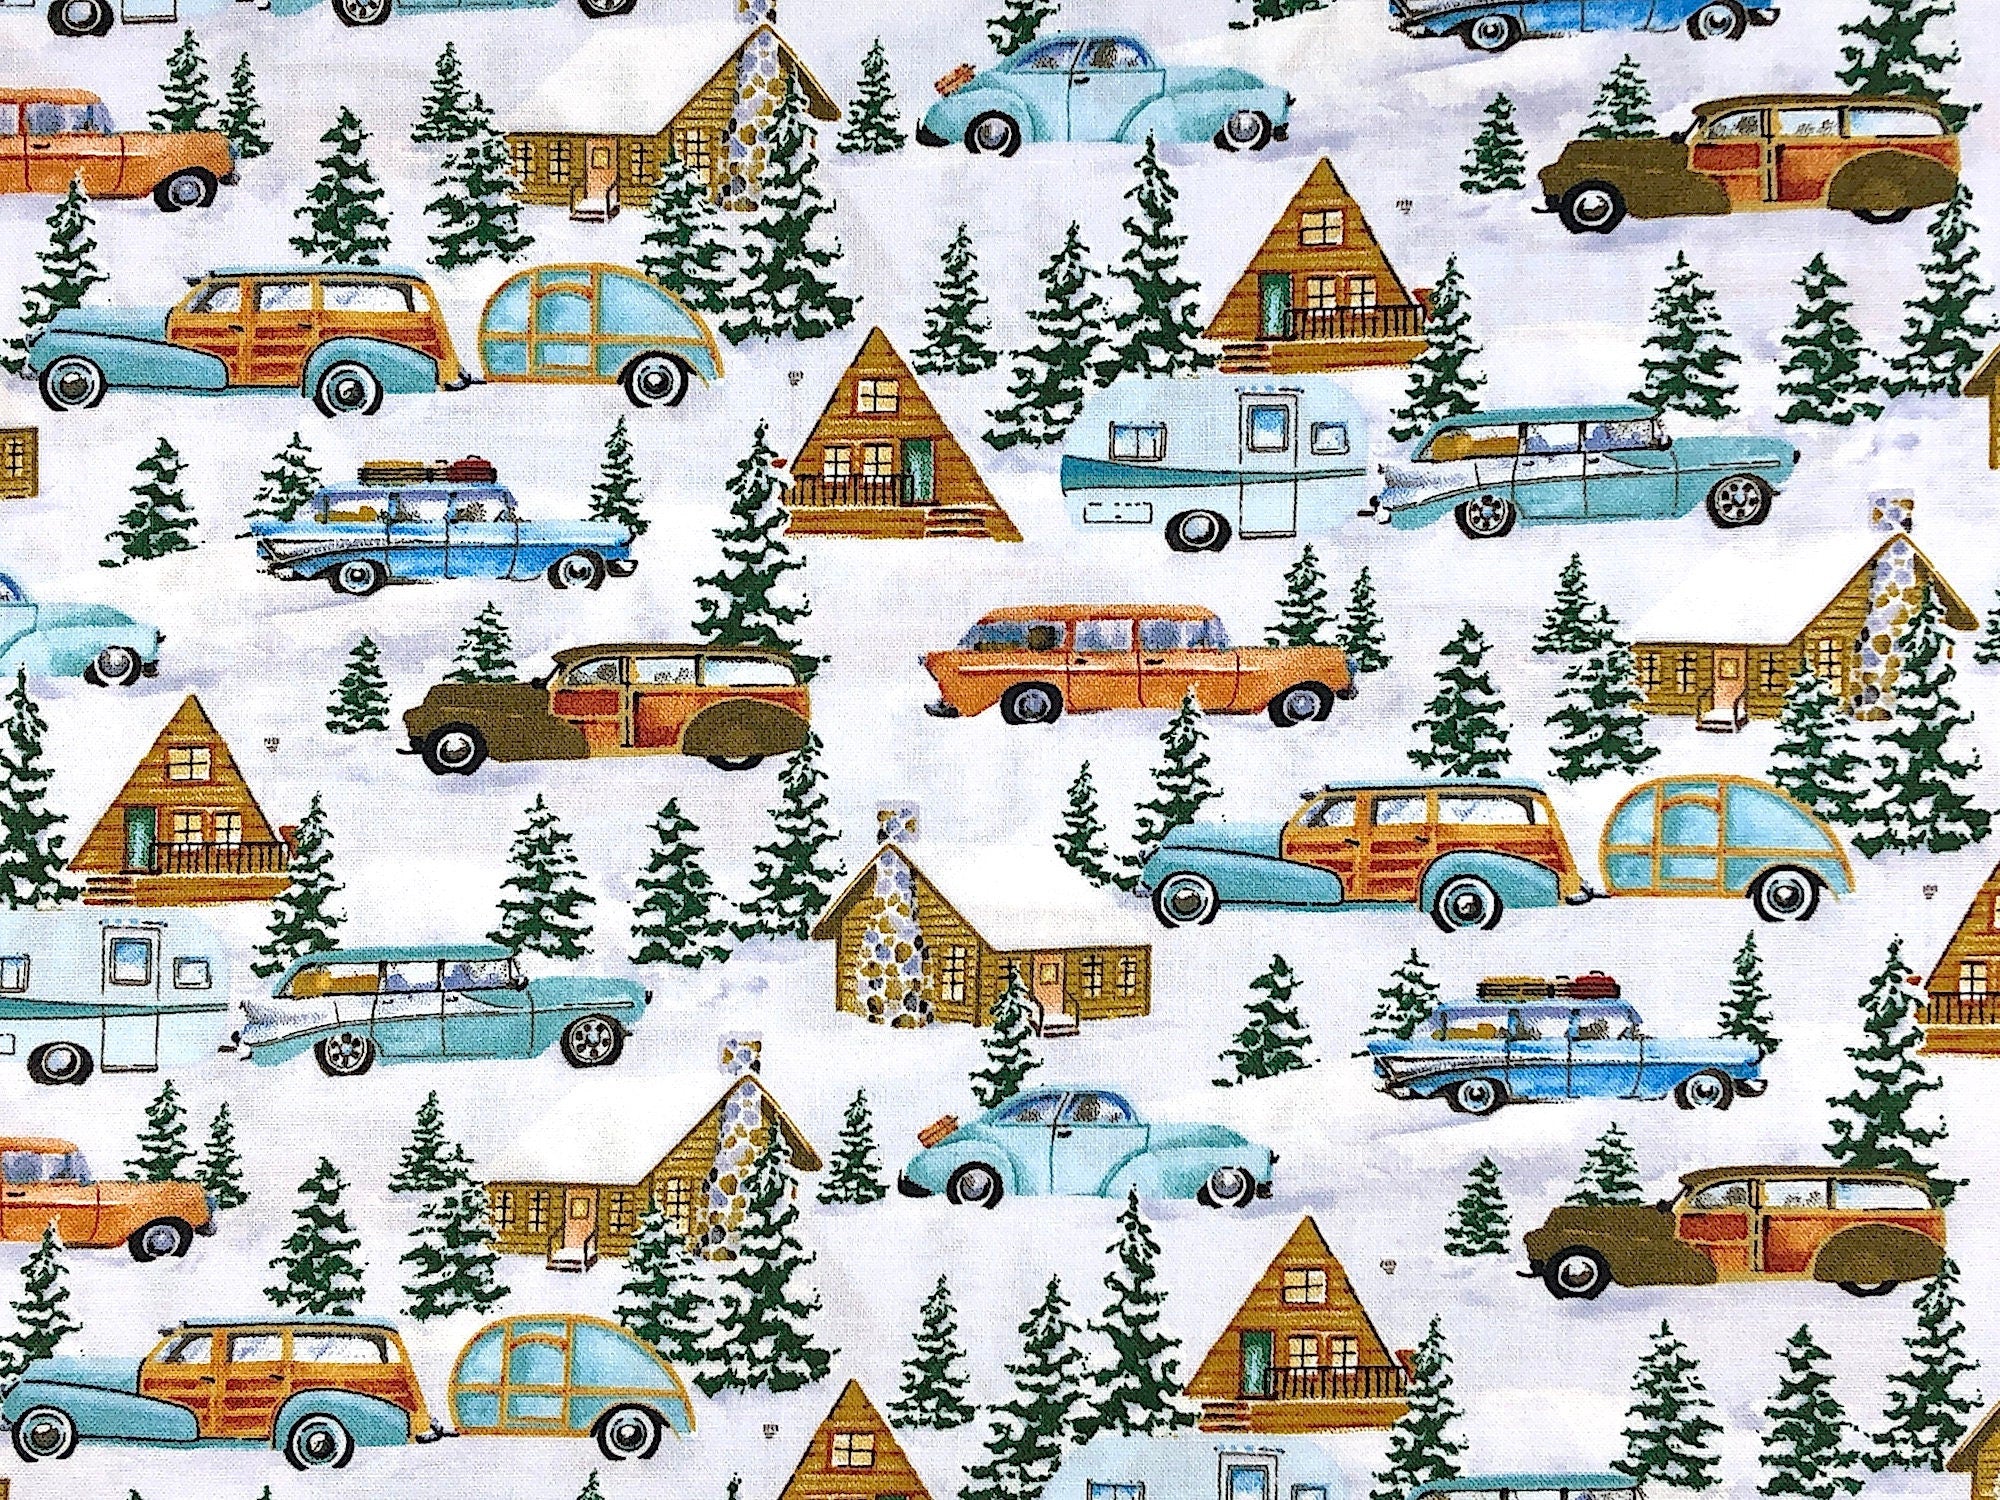 This fabric is called Snowy Woods. This white fabric is covered with snow covered trees, old time cars, some of which are pulling travel trailers. You will also find cabins on this winter fabric.